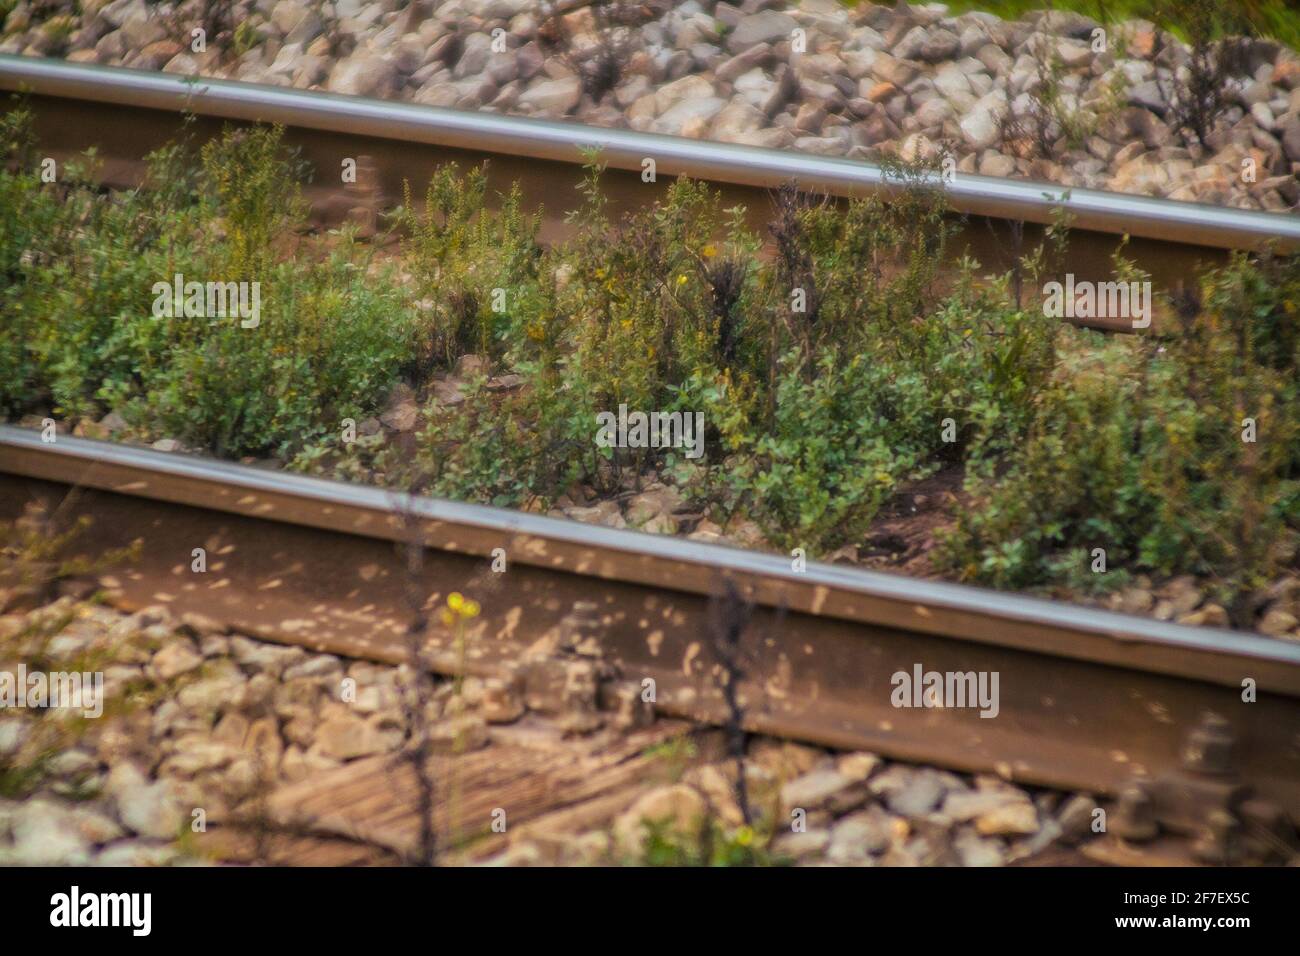 Poor condition of mainline train tracks. Heavy gauge normal train tracks with wooden sleepers but with grass growing up betwee gravel due to poor main Stock Photo